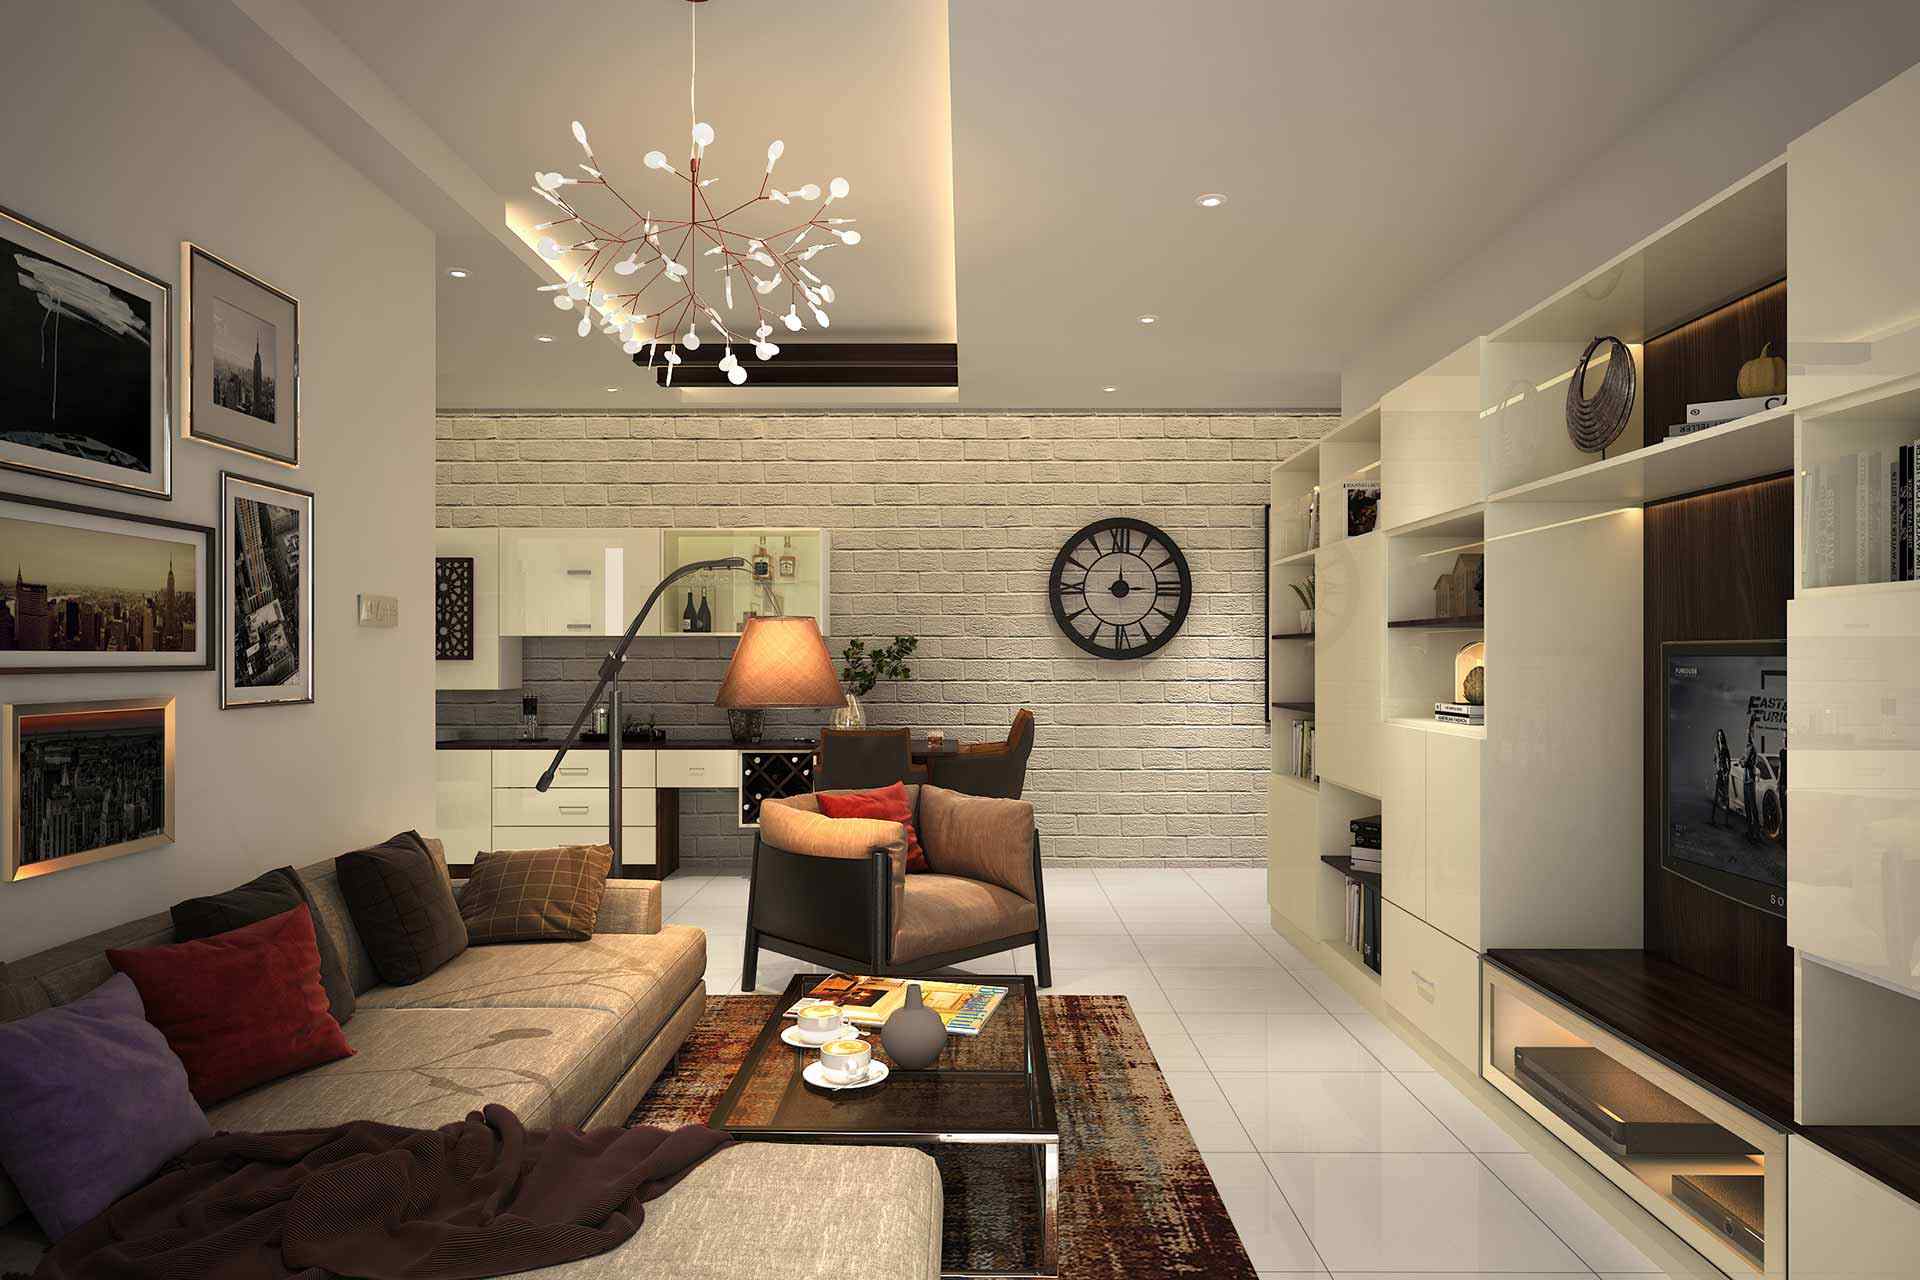 a comprehensive guide to some stunning living room lighting ideas